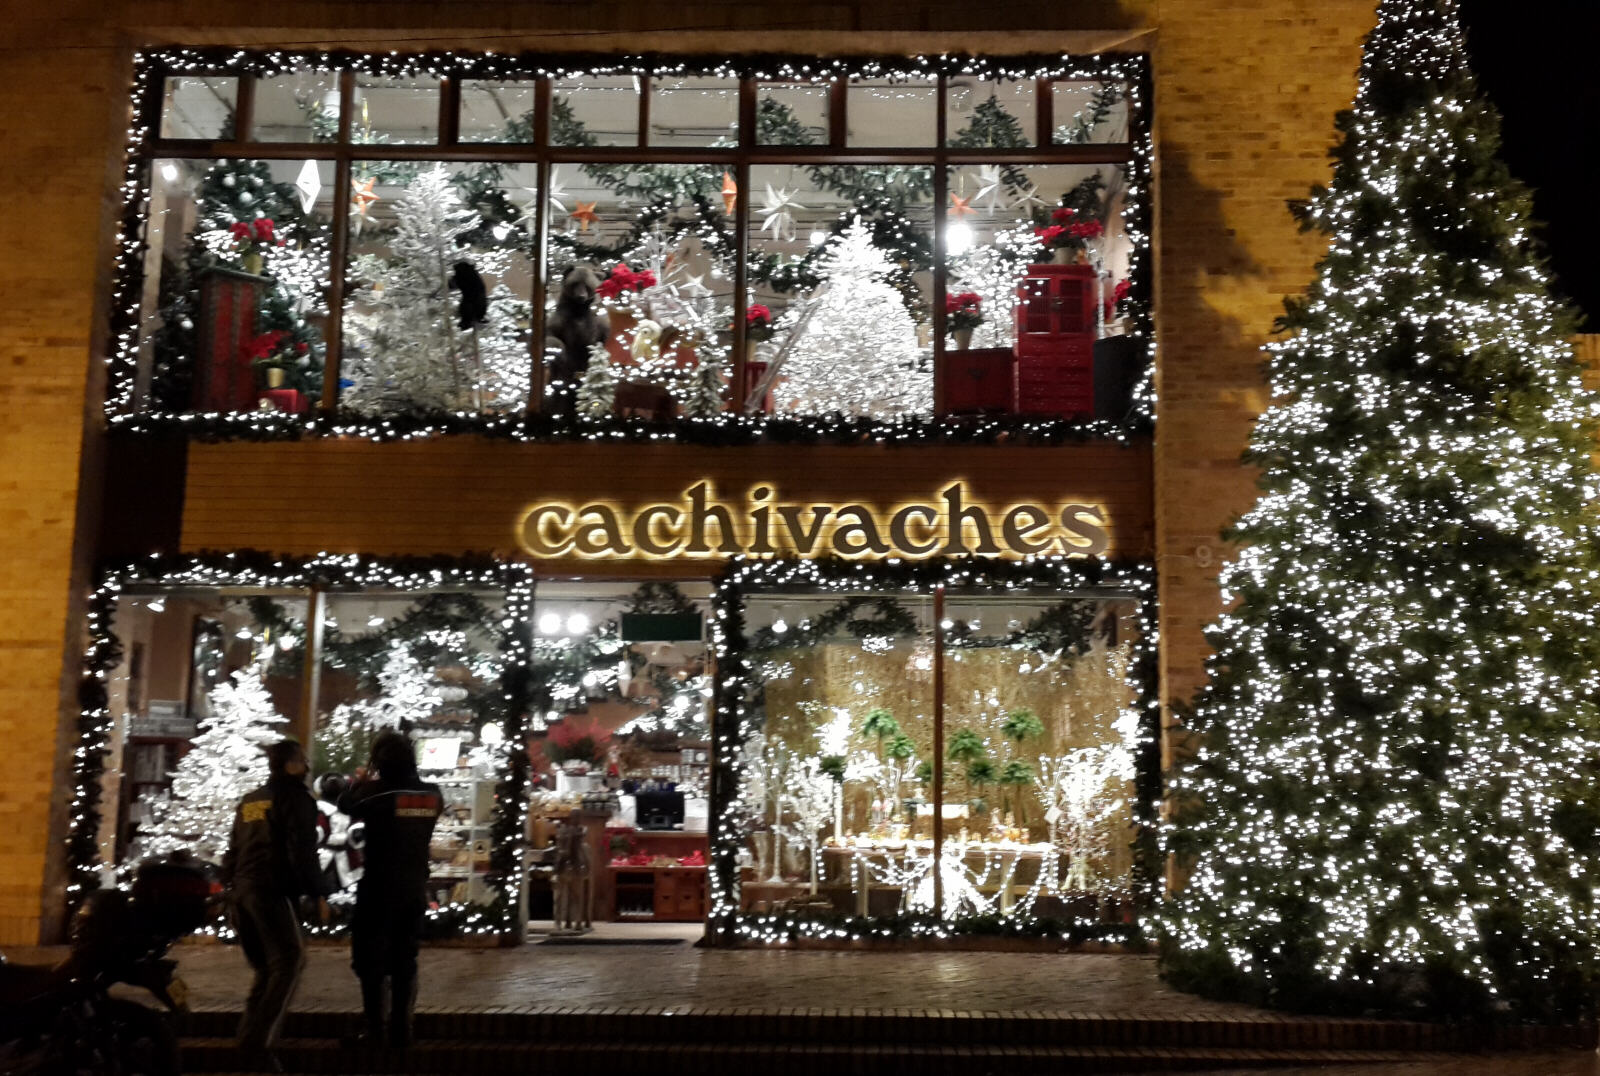 A Christmas shop in Zona Rosa, Bogota, Colombia